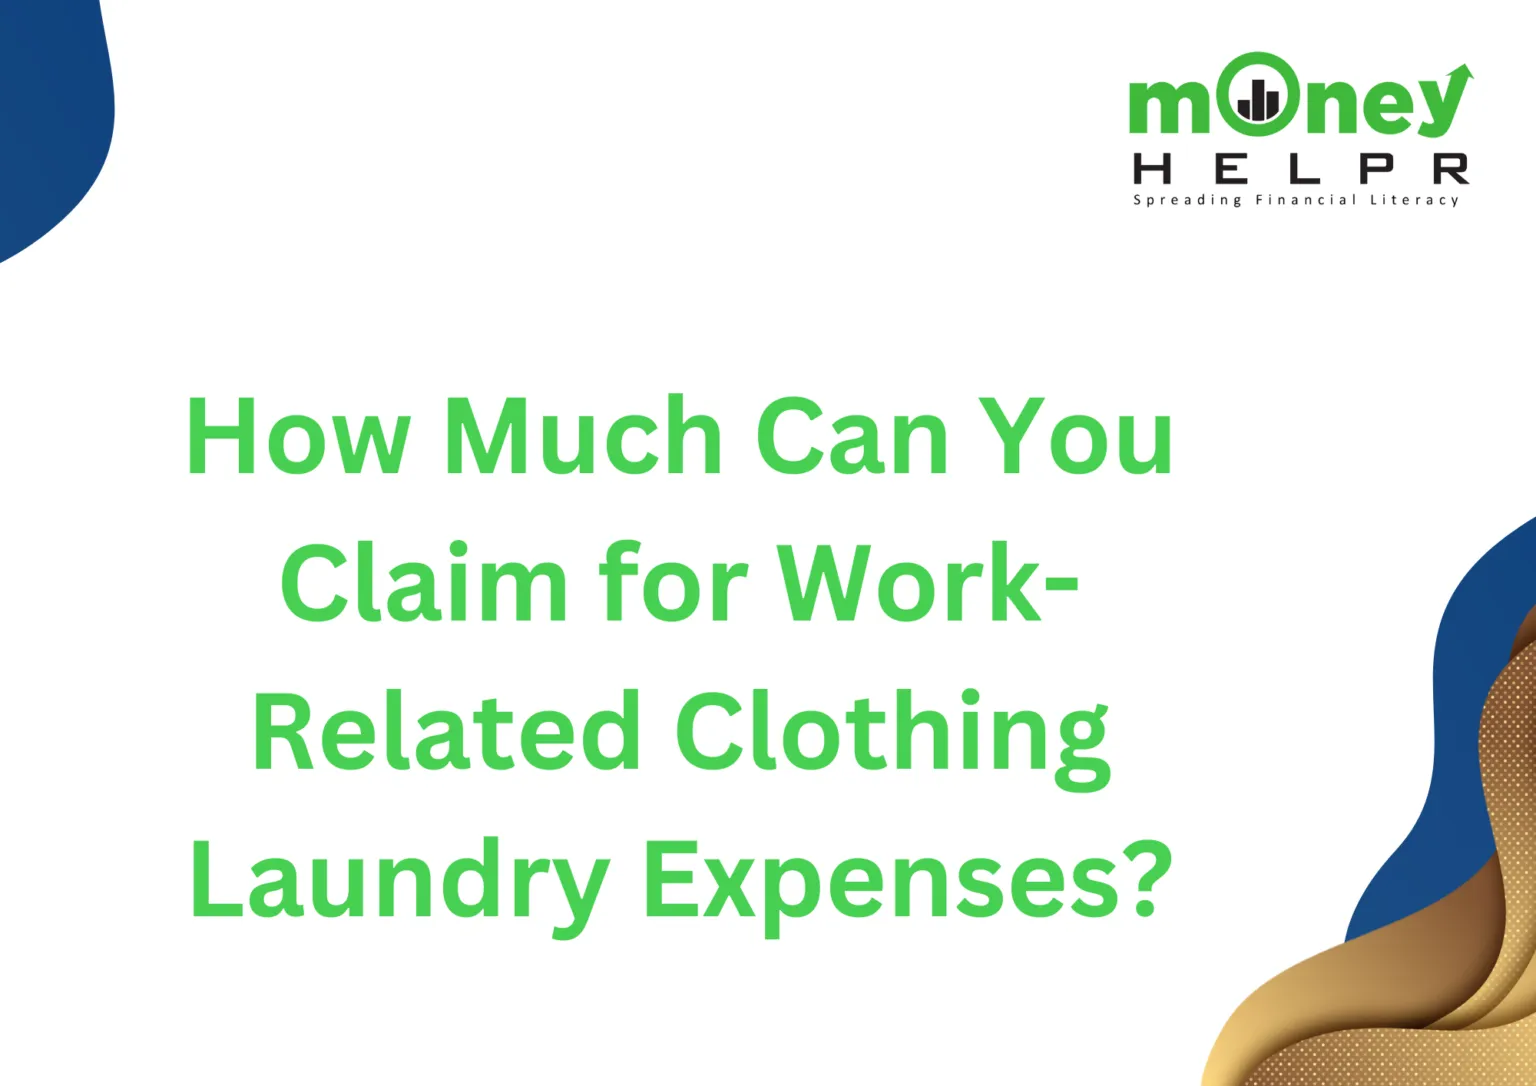 how-much-can-you-claim-for-work-related-clothing-laundry-expenses